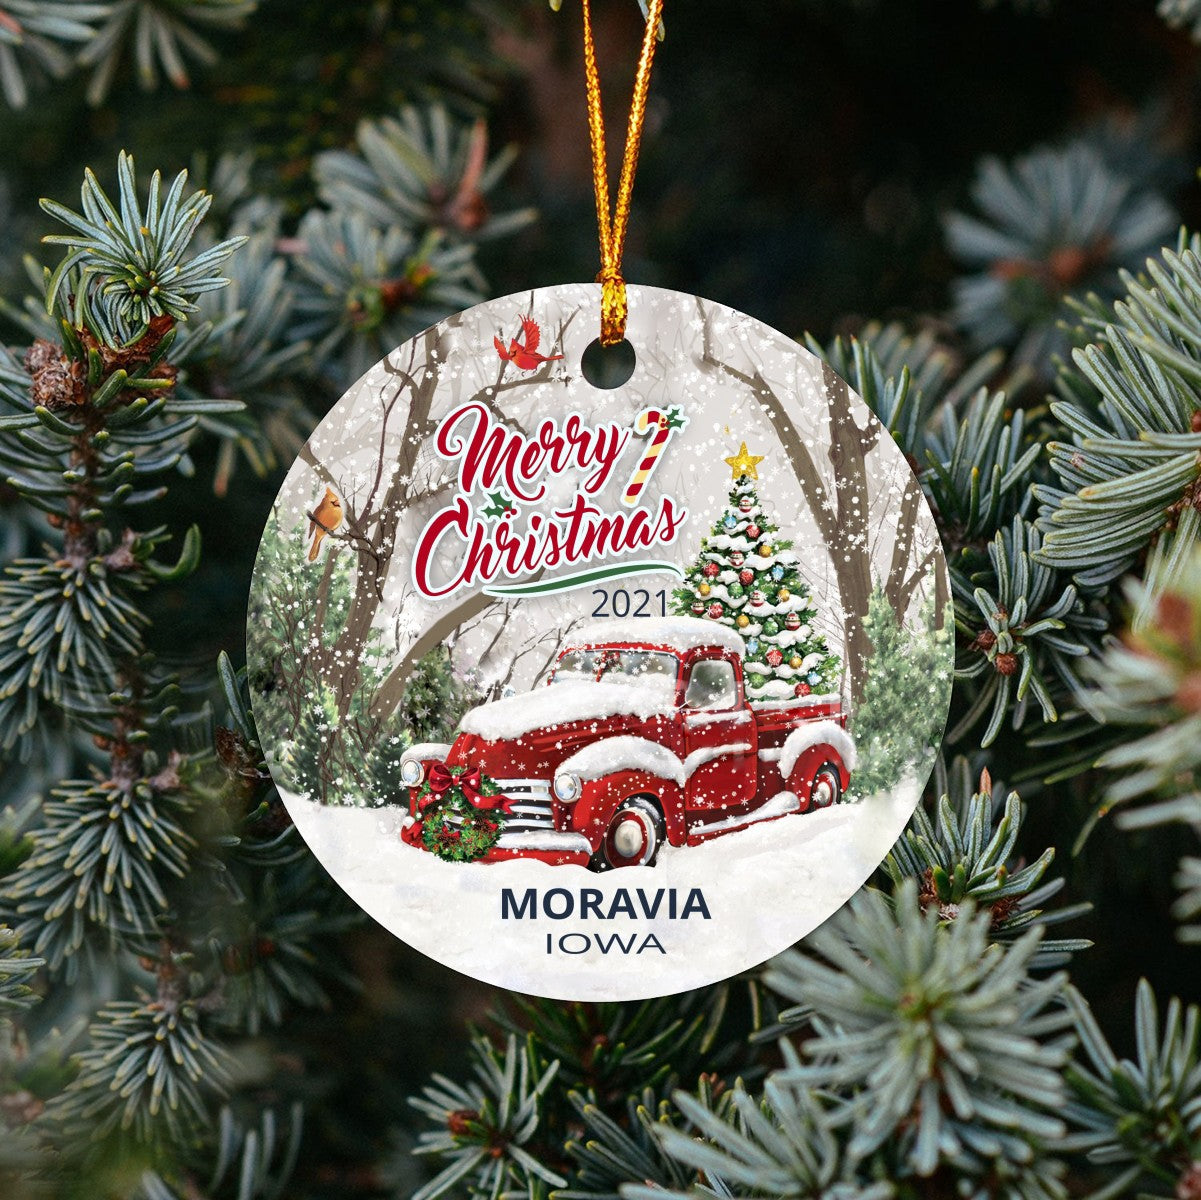 Christmas Tree Ornaments Moravia - Ornament With Name City, State Moravia Iowa IA Ornament - Red Truck Xmas Ornaments 3'' Plastic Gift For Family, Friend And Housewarming